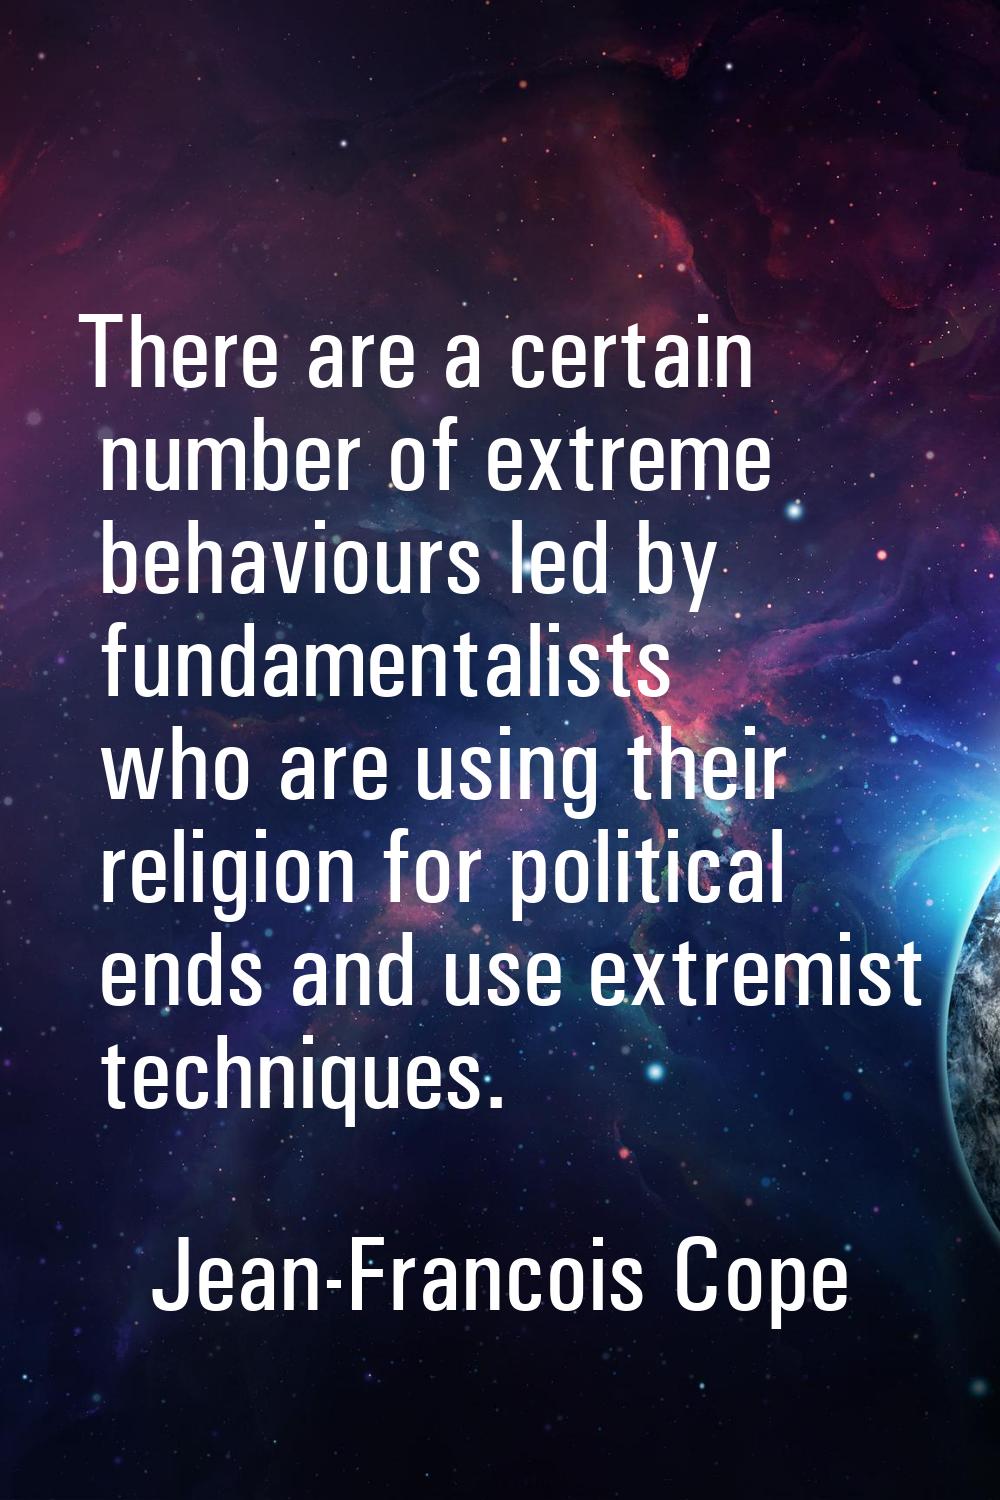 There are a certain number of extreme behaviours led by fundamentalists who are using their religio